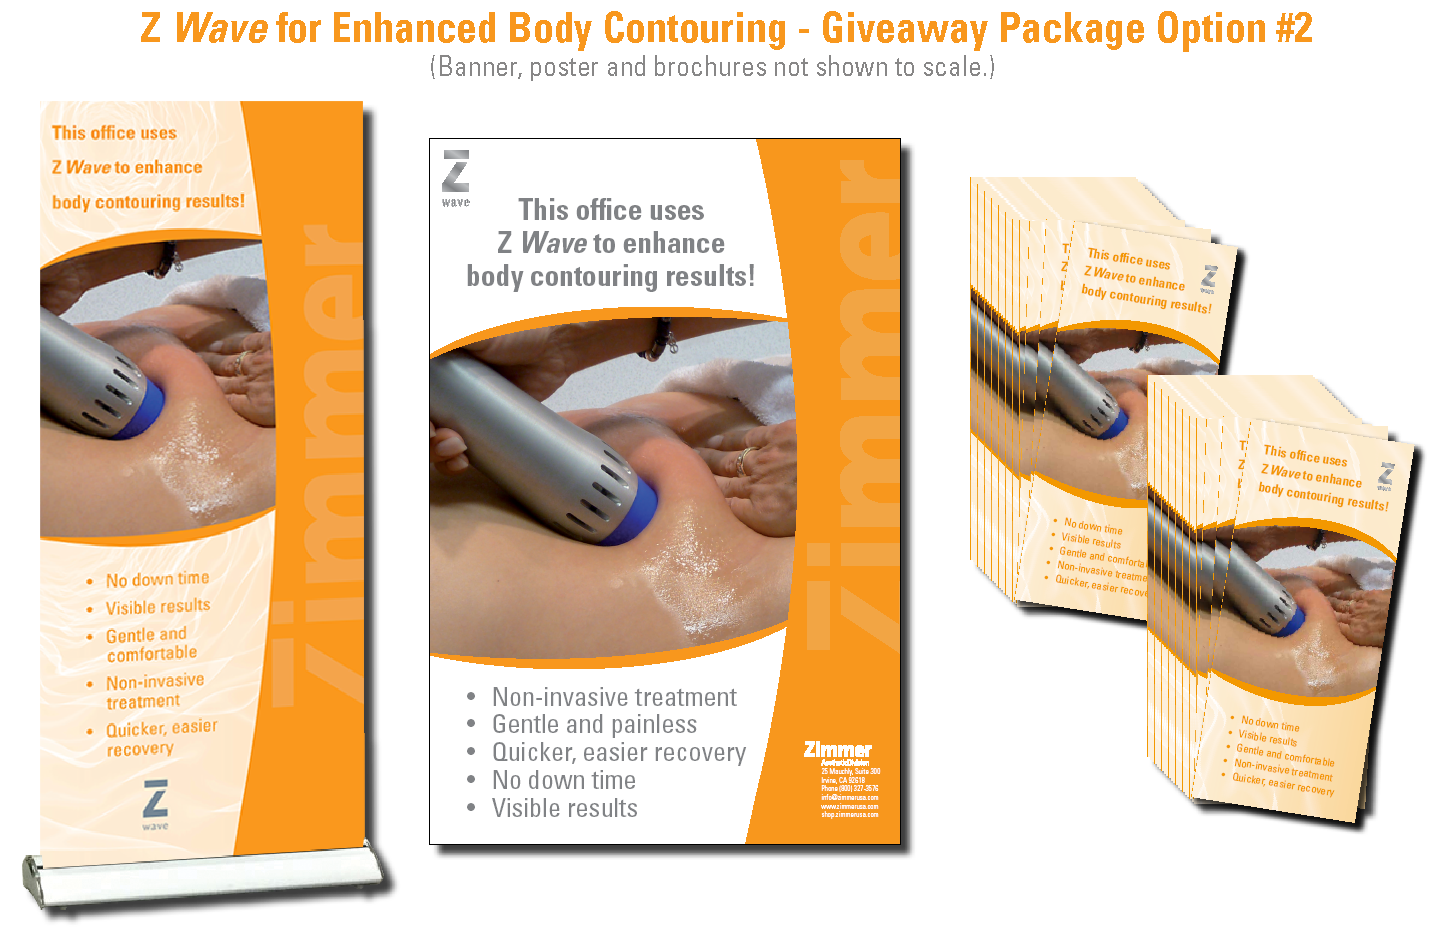 Basic Clinician Marketing Package - Z Wave Enh Body Contouring_+ Roll-Up_RW